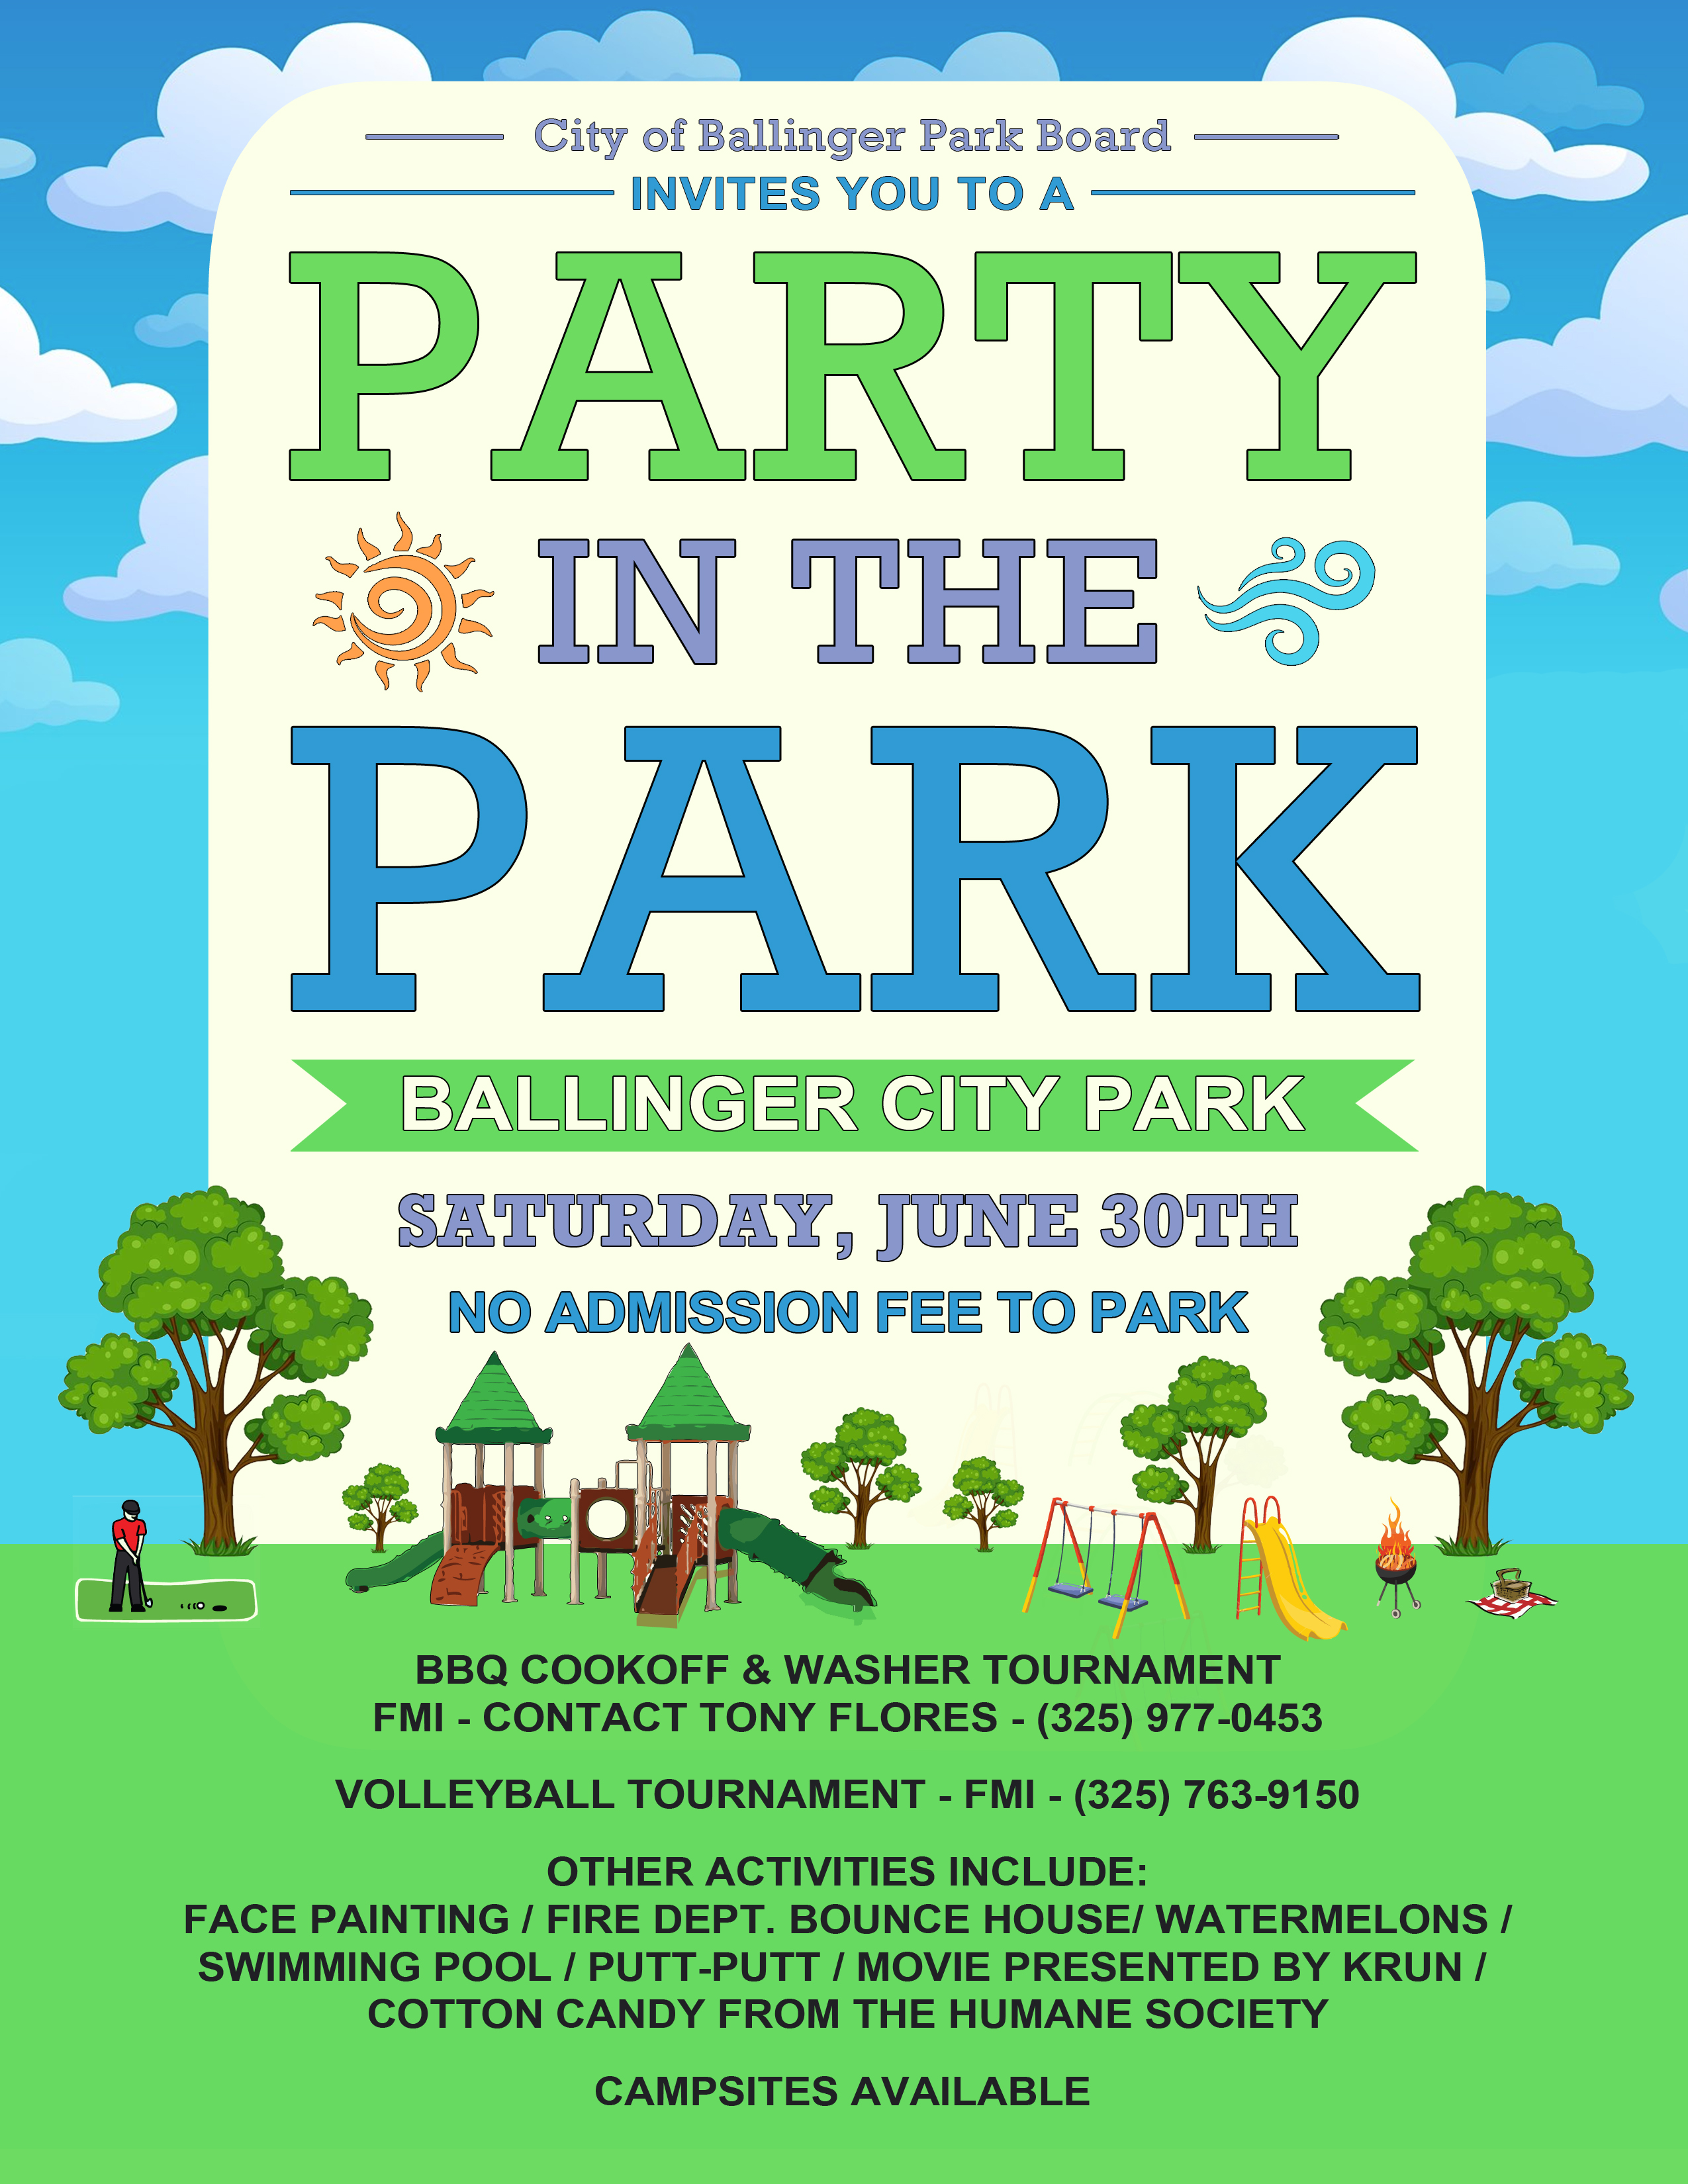 City Park Board invites you to a Party in the Park on June 30th ...